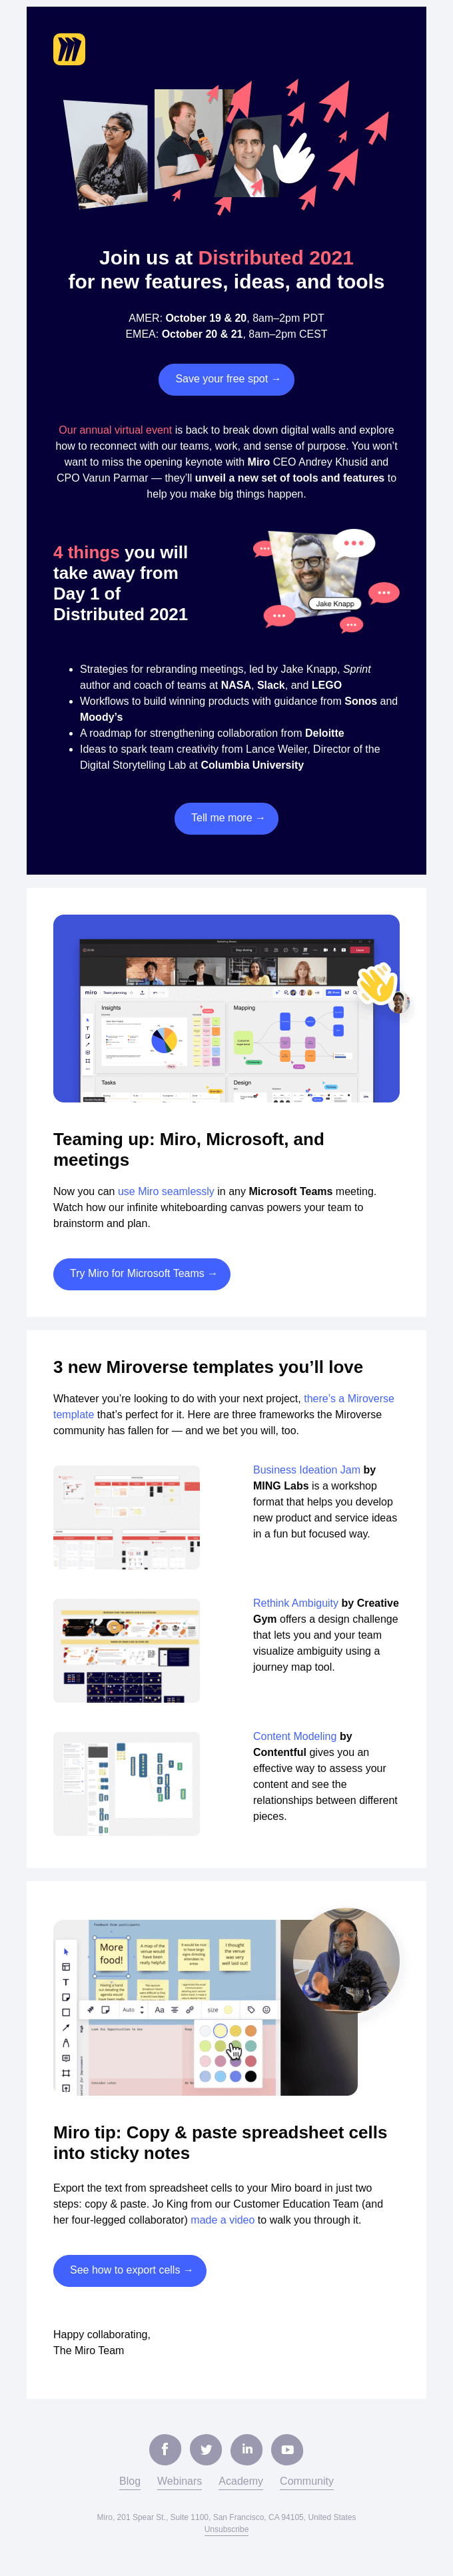 Connecting Is Back — Come to Distributed 2021 - Miro Email Newsletter